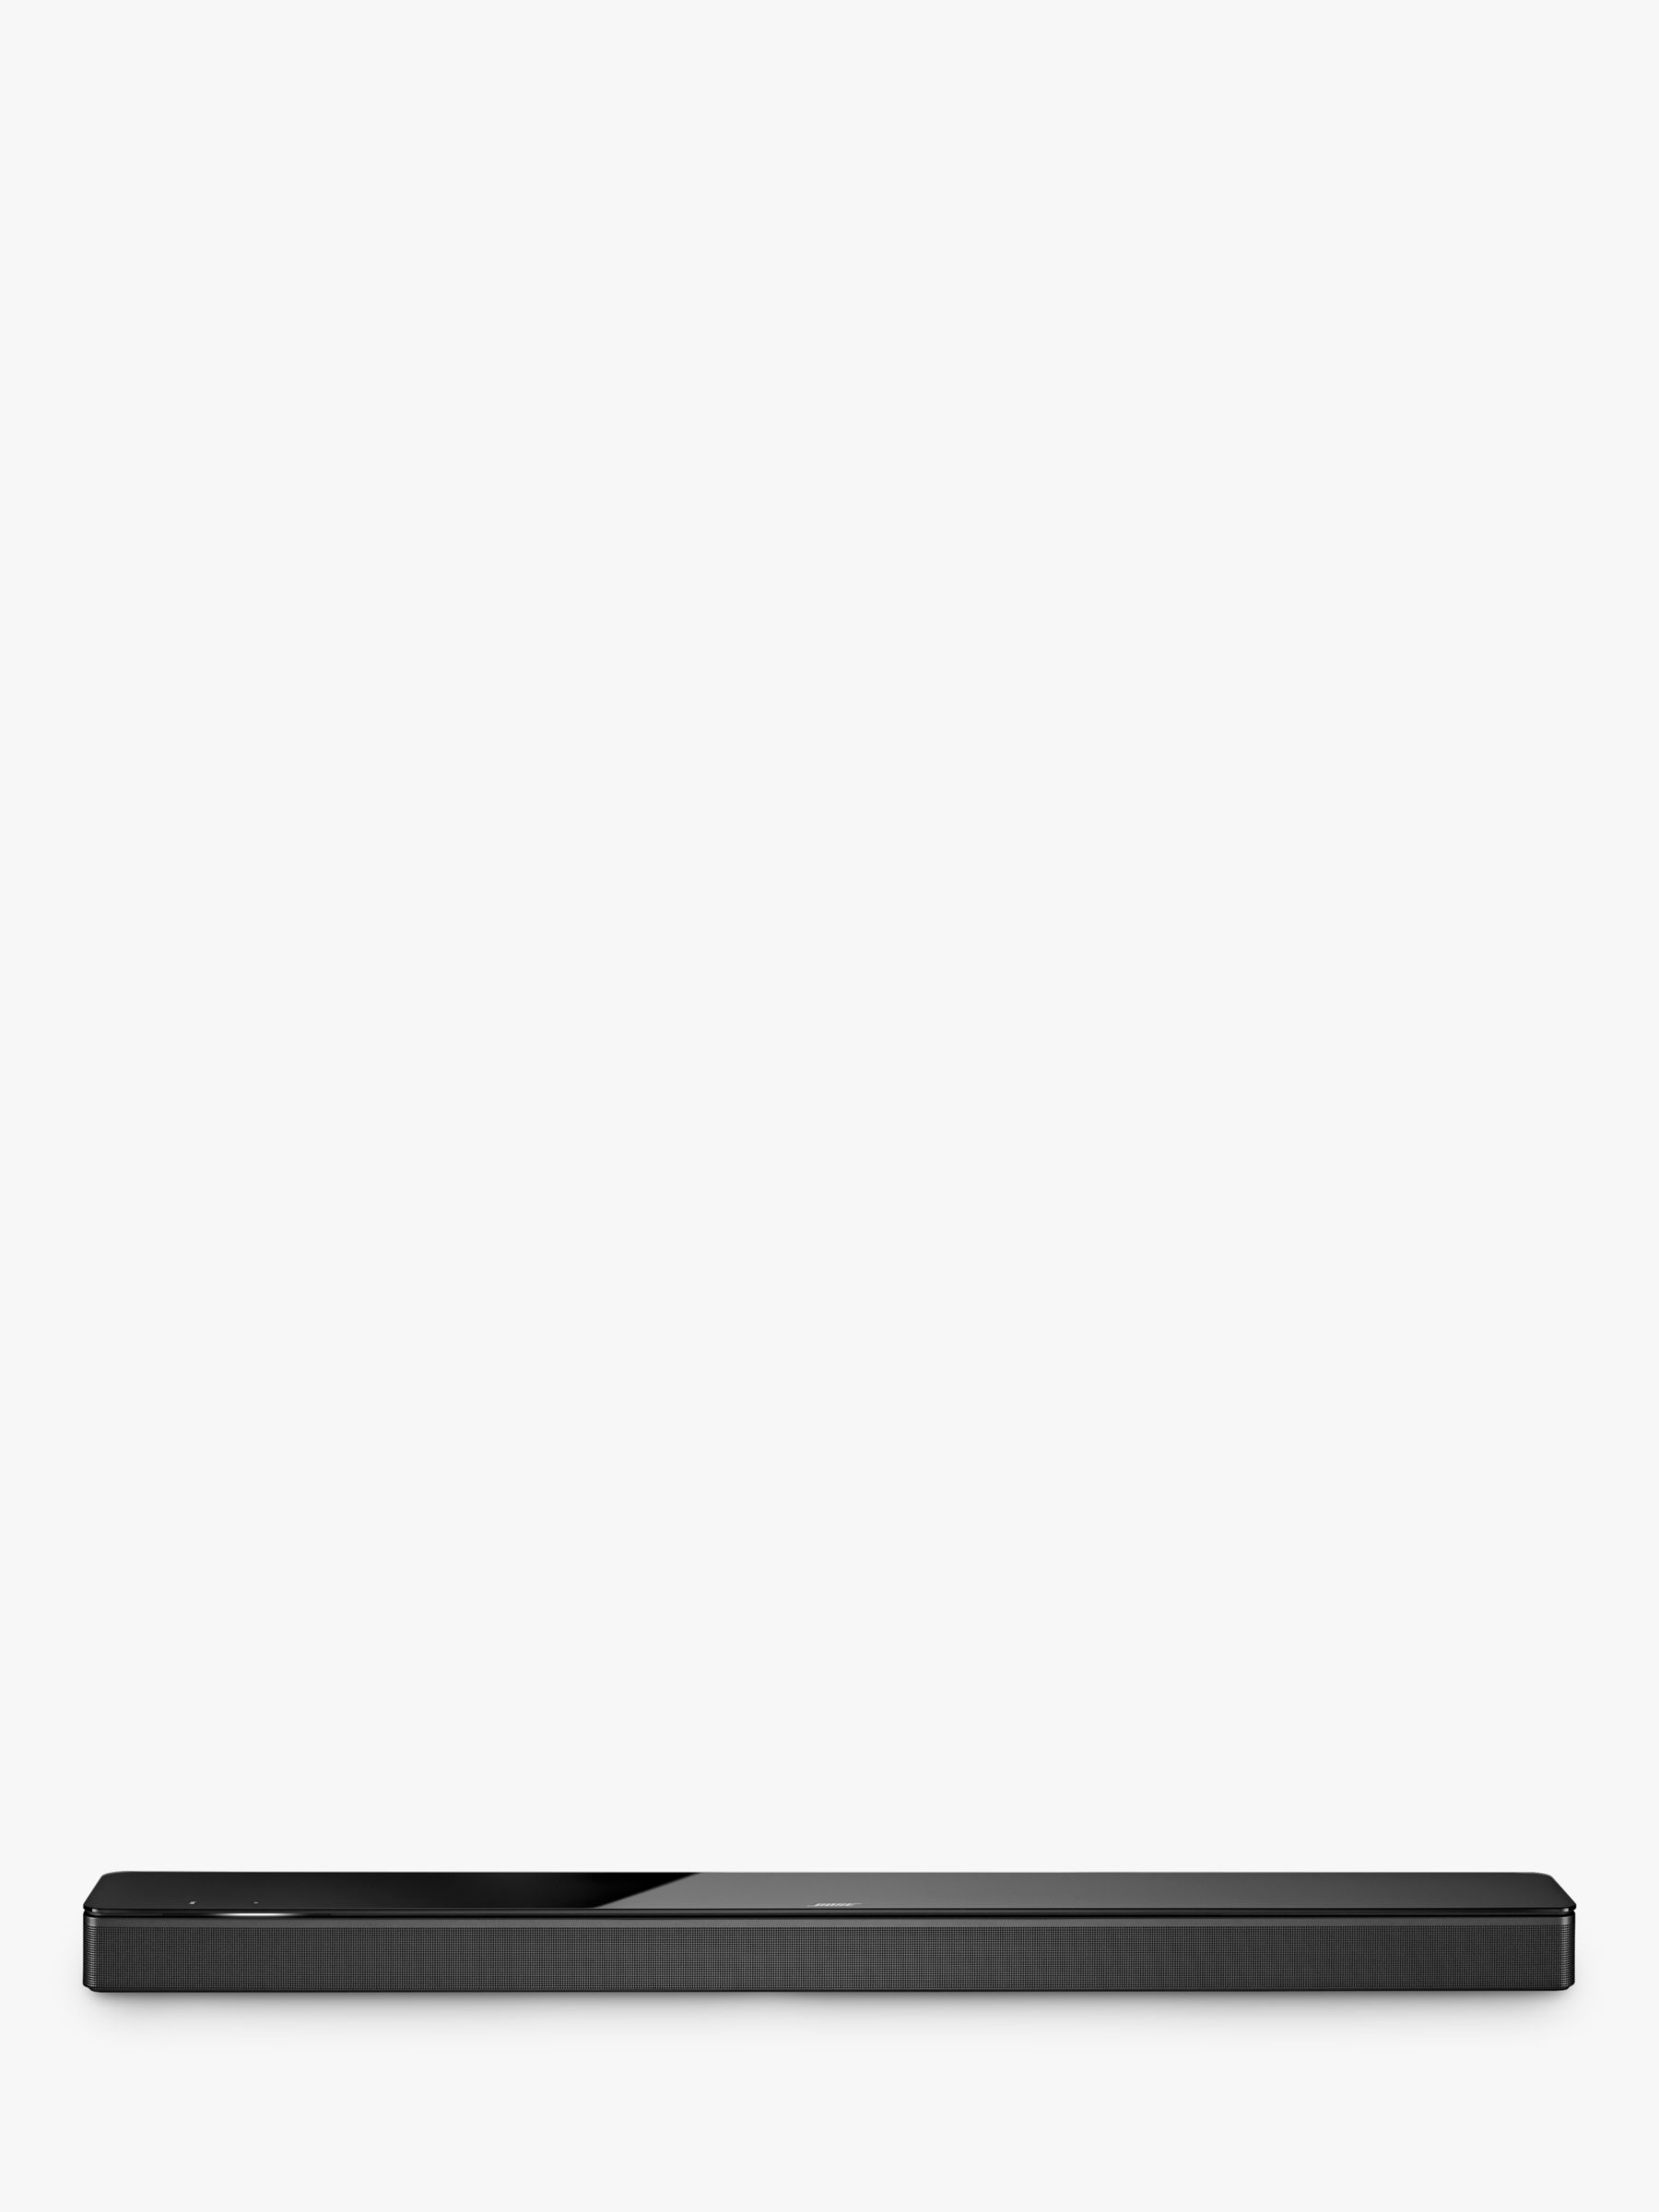 Bose® Sound Bar 700 with Wi-Fi, Bluetooth & Alexa Voice Recognition and Control